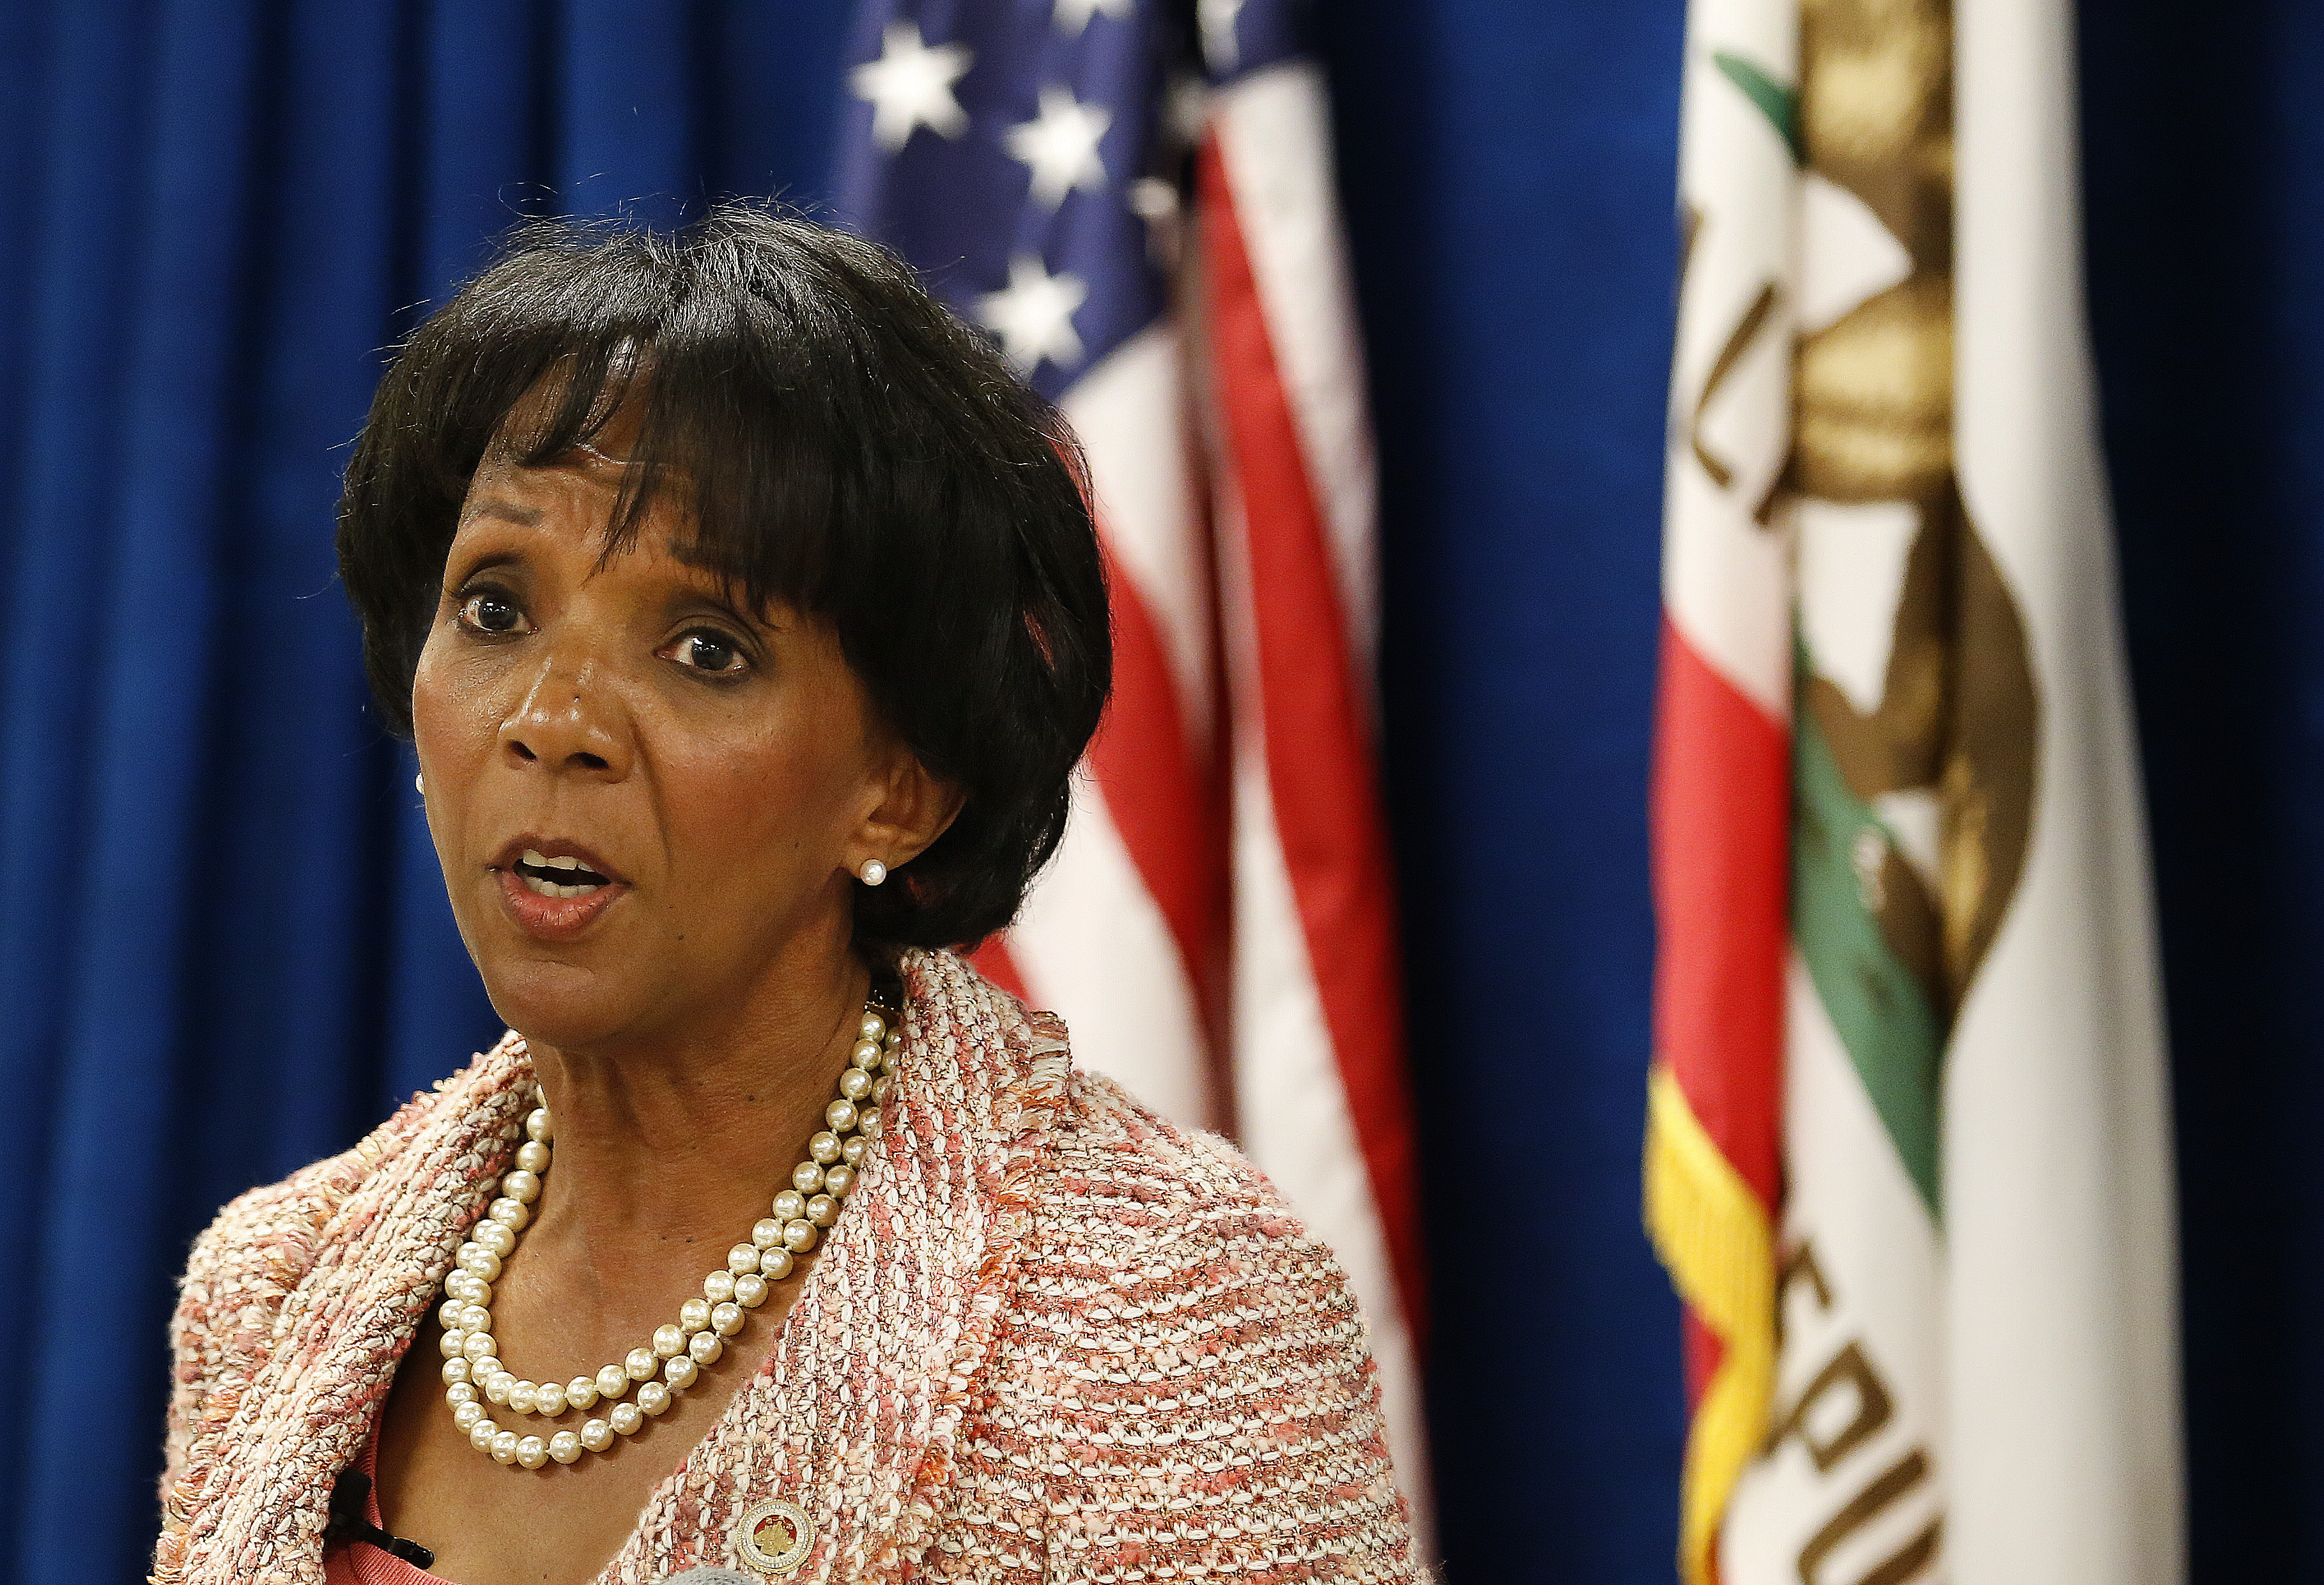 Los Angeles County District Attorney Jackie Lacey announces the creation of the Conviction Review Unit during a press conference on June 29, 2015 in  Los Angeles. (Mel Melcon—Los Angeles Times/Getty Images)